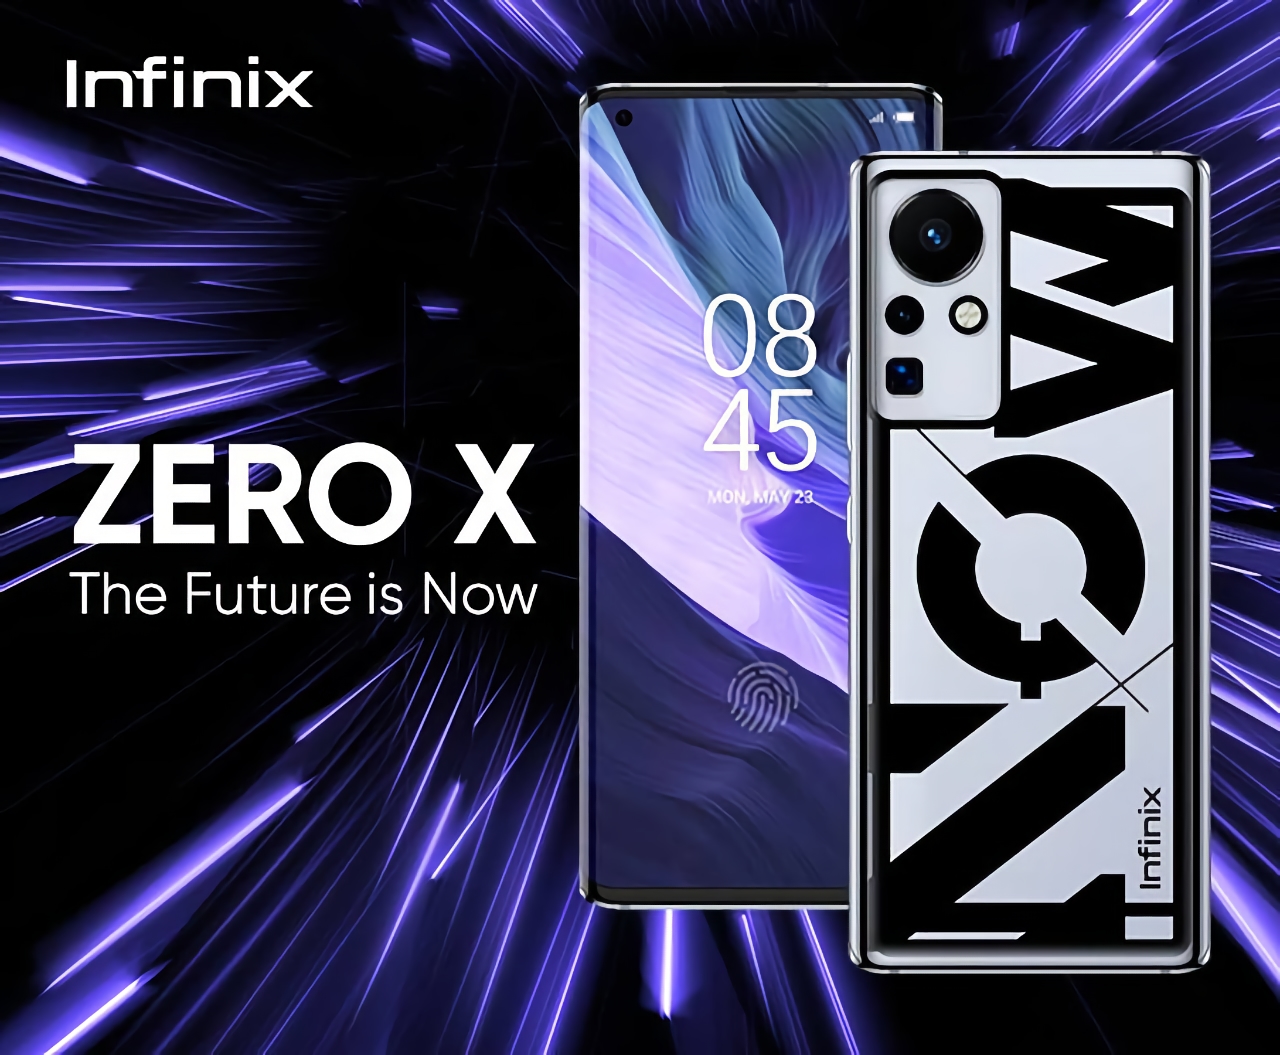 Infinix Zero X: This Will Be The Name Of The World's First Smartphone With 160W Fast Charging Support